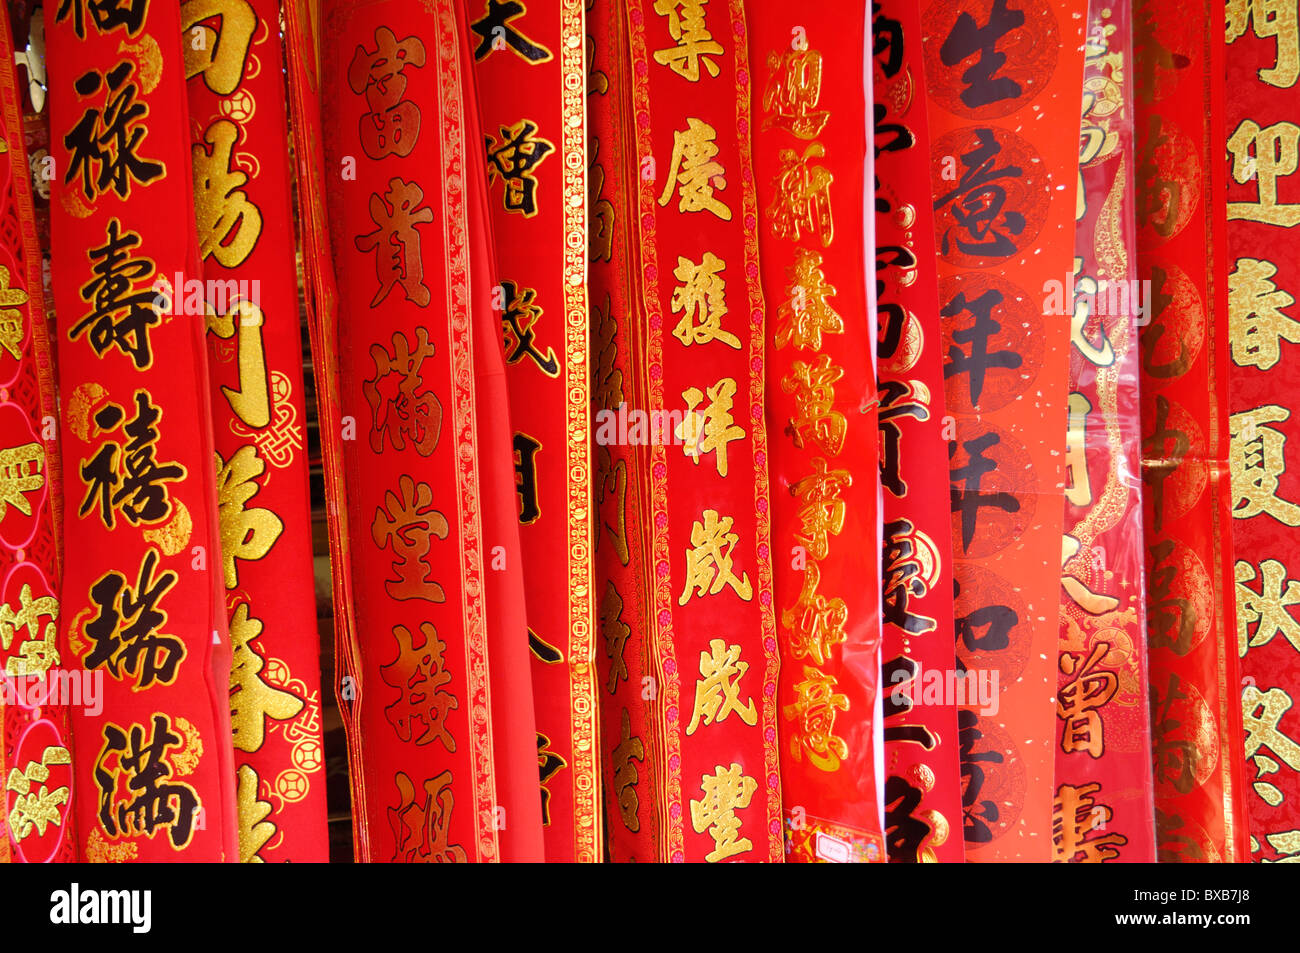 Chinese lucky poesie sul banner rosso, Dihua Street, Taipei, Taiwan Foto Stock